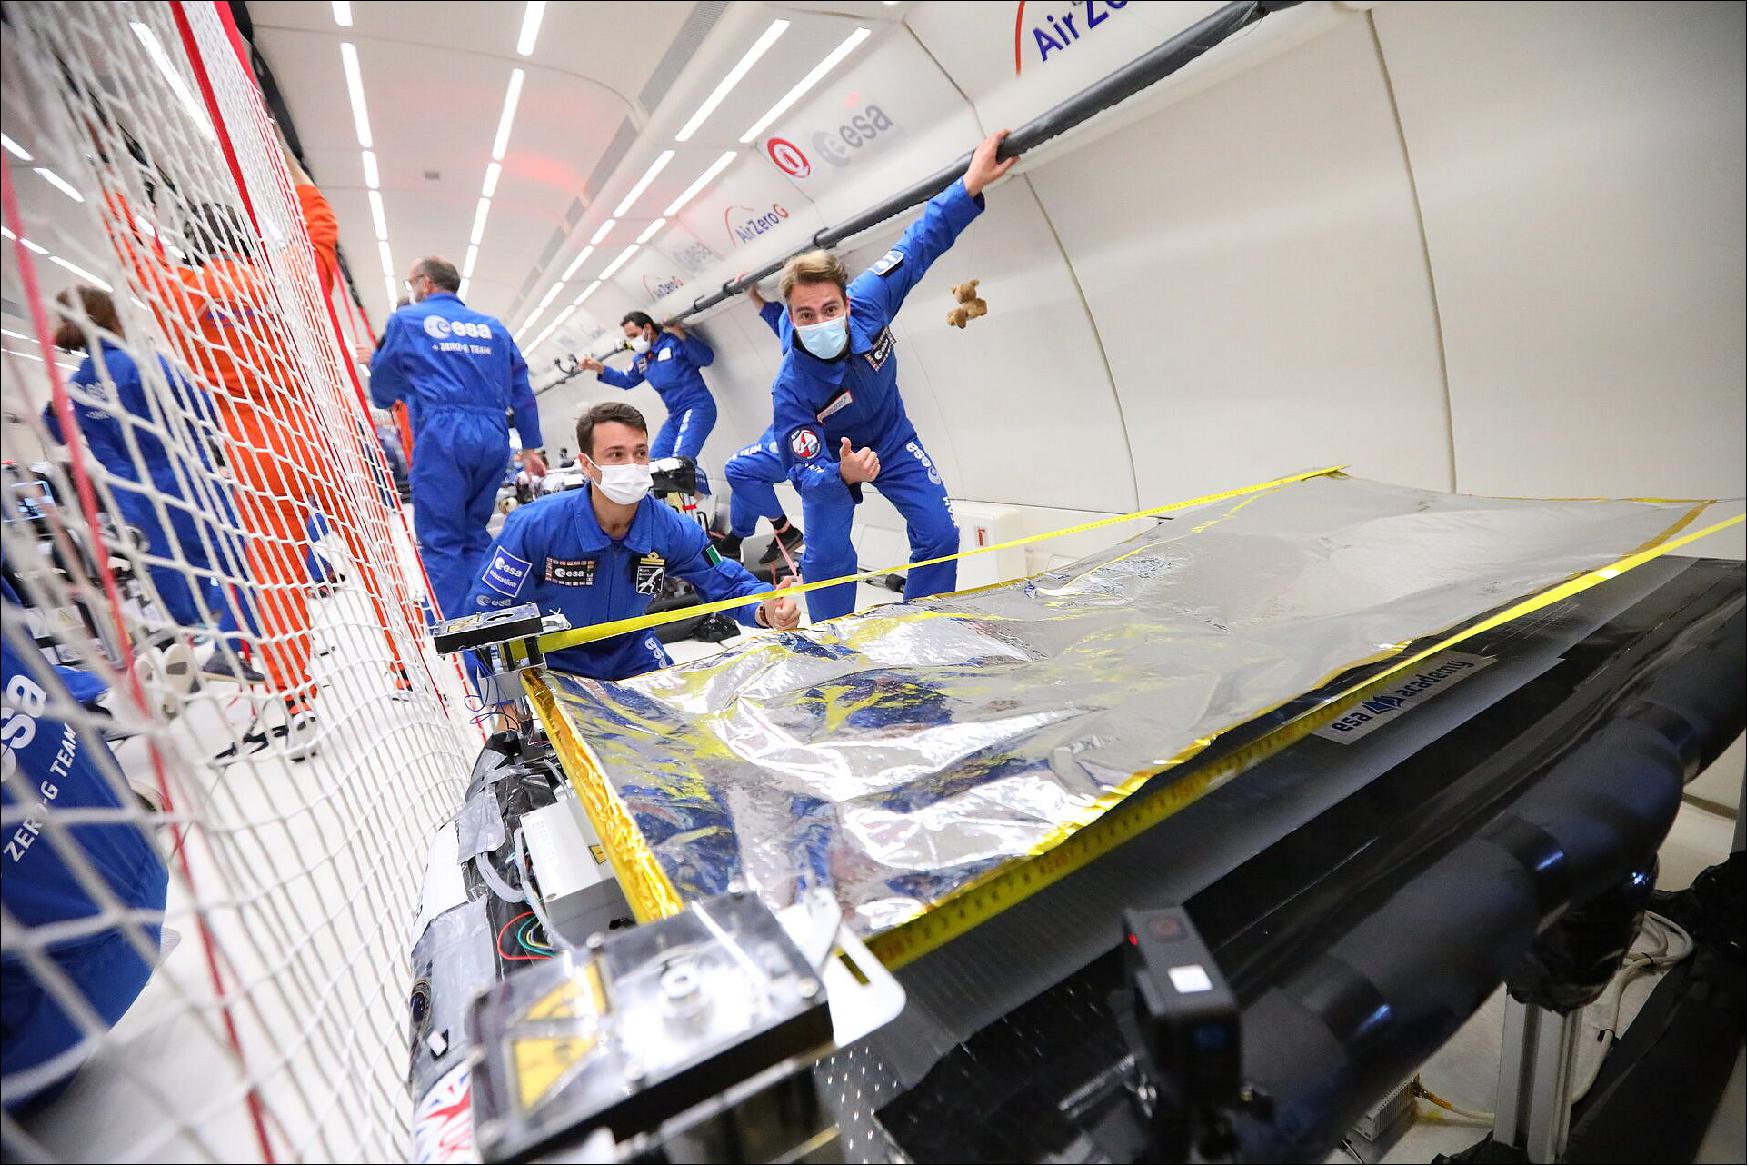 Figure 70: Fly Your Thesis! team LEOniDAS at the 77th ESA Parabolic Flight Campaign (image credit: Novespace)